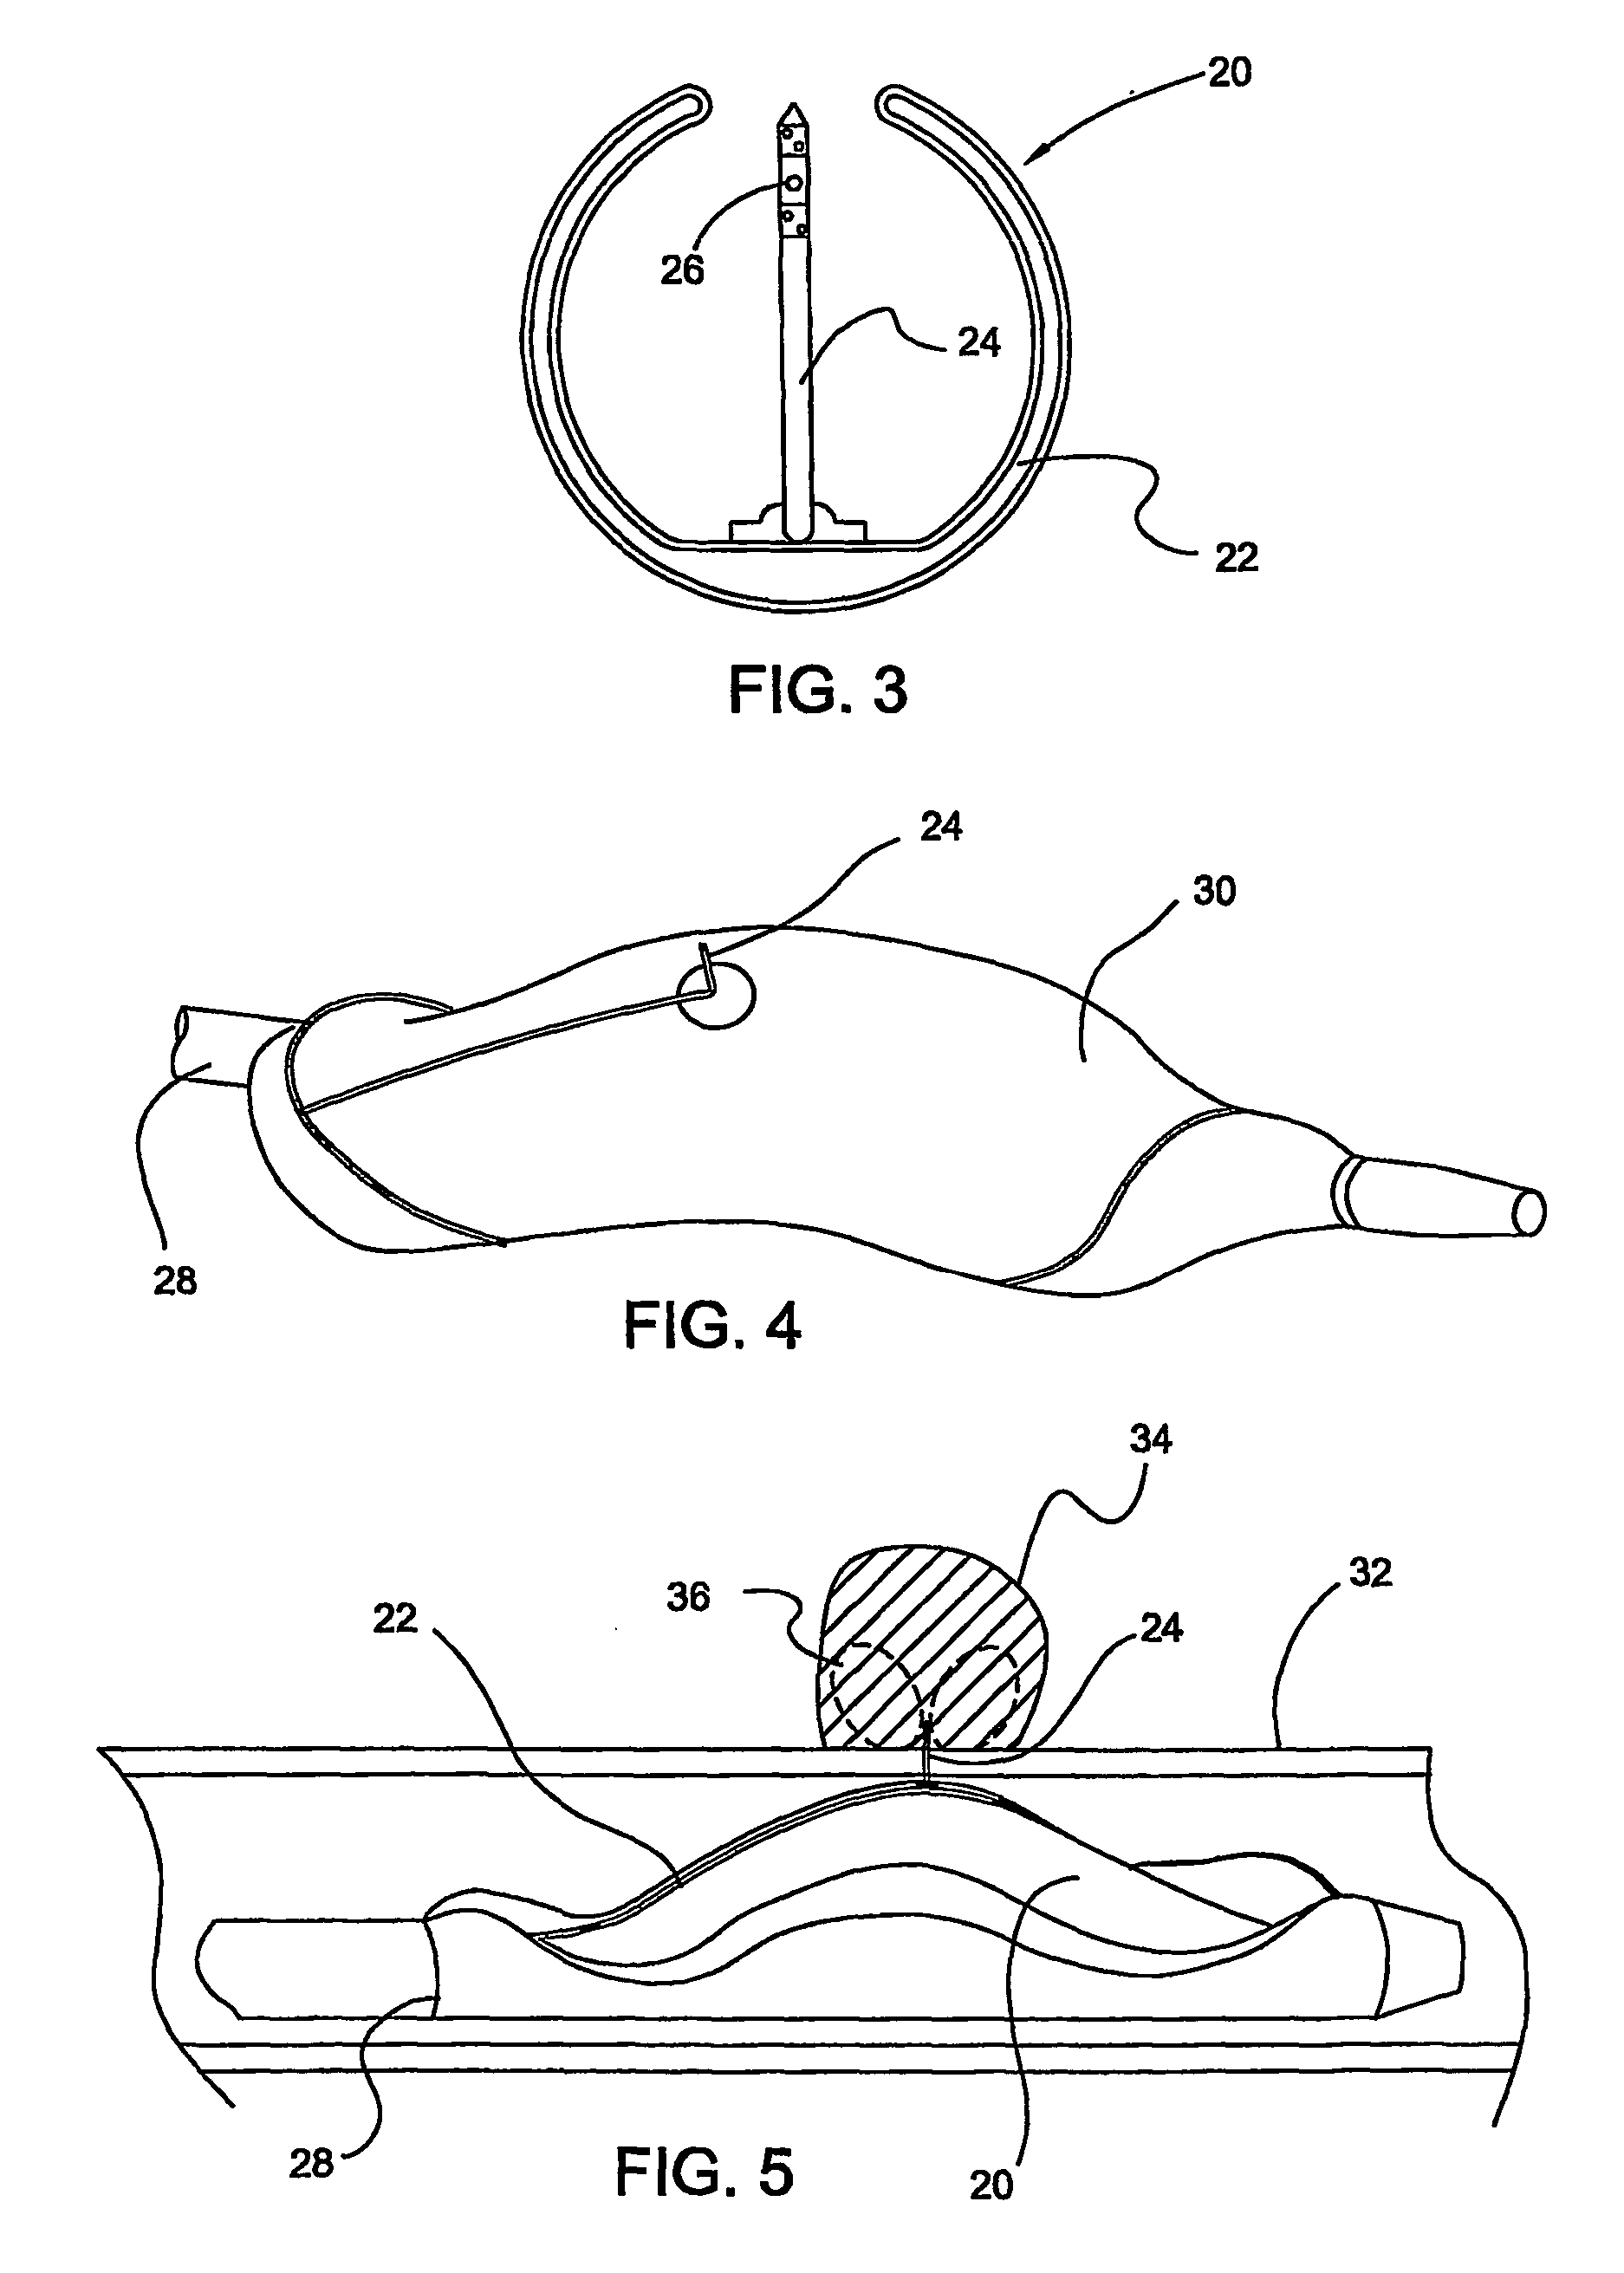 Medical devices with proteasome inhibitors for the treatment of restenosis